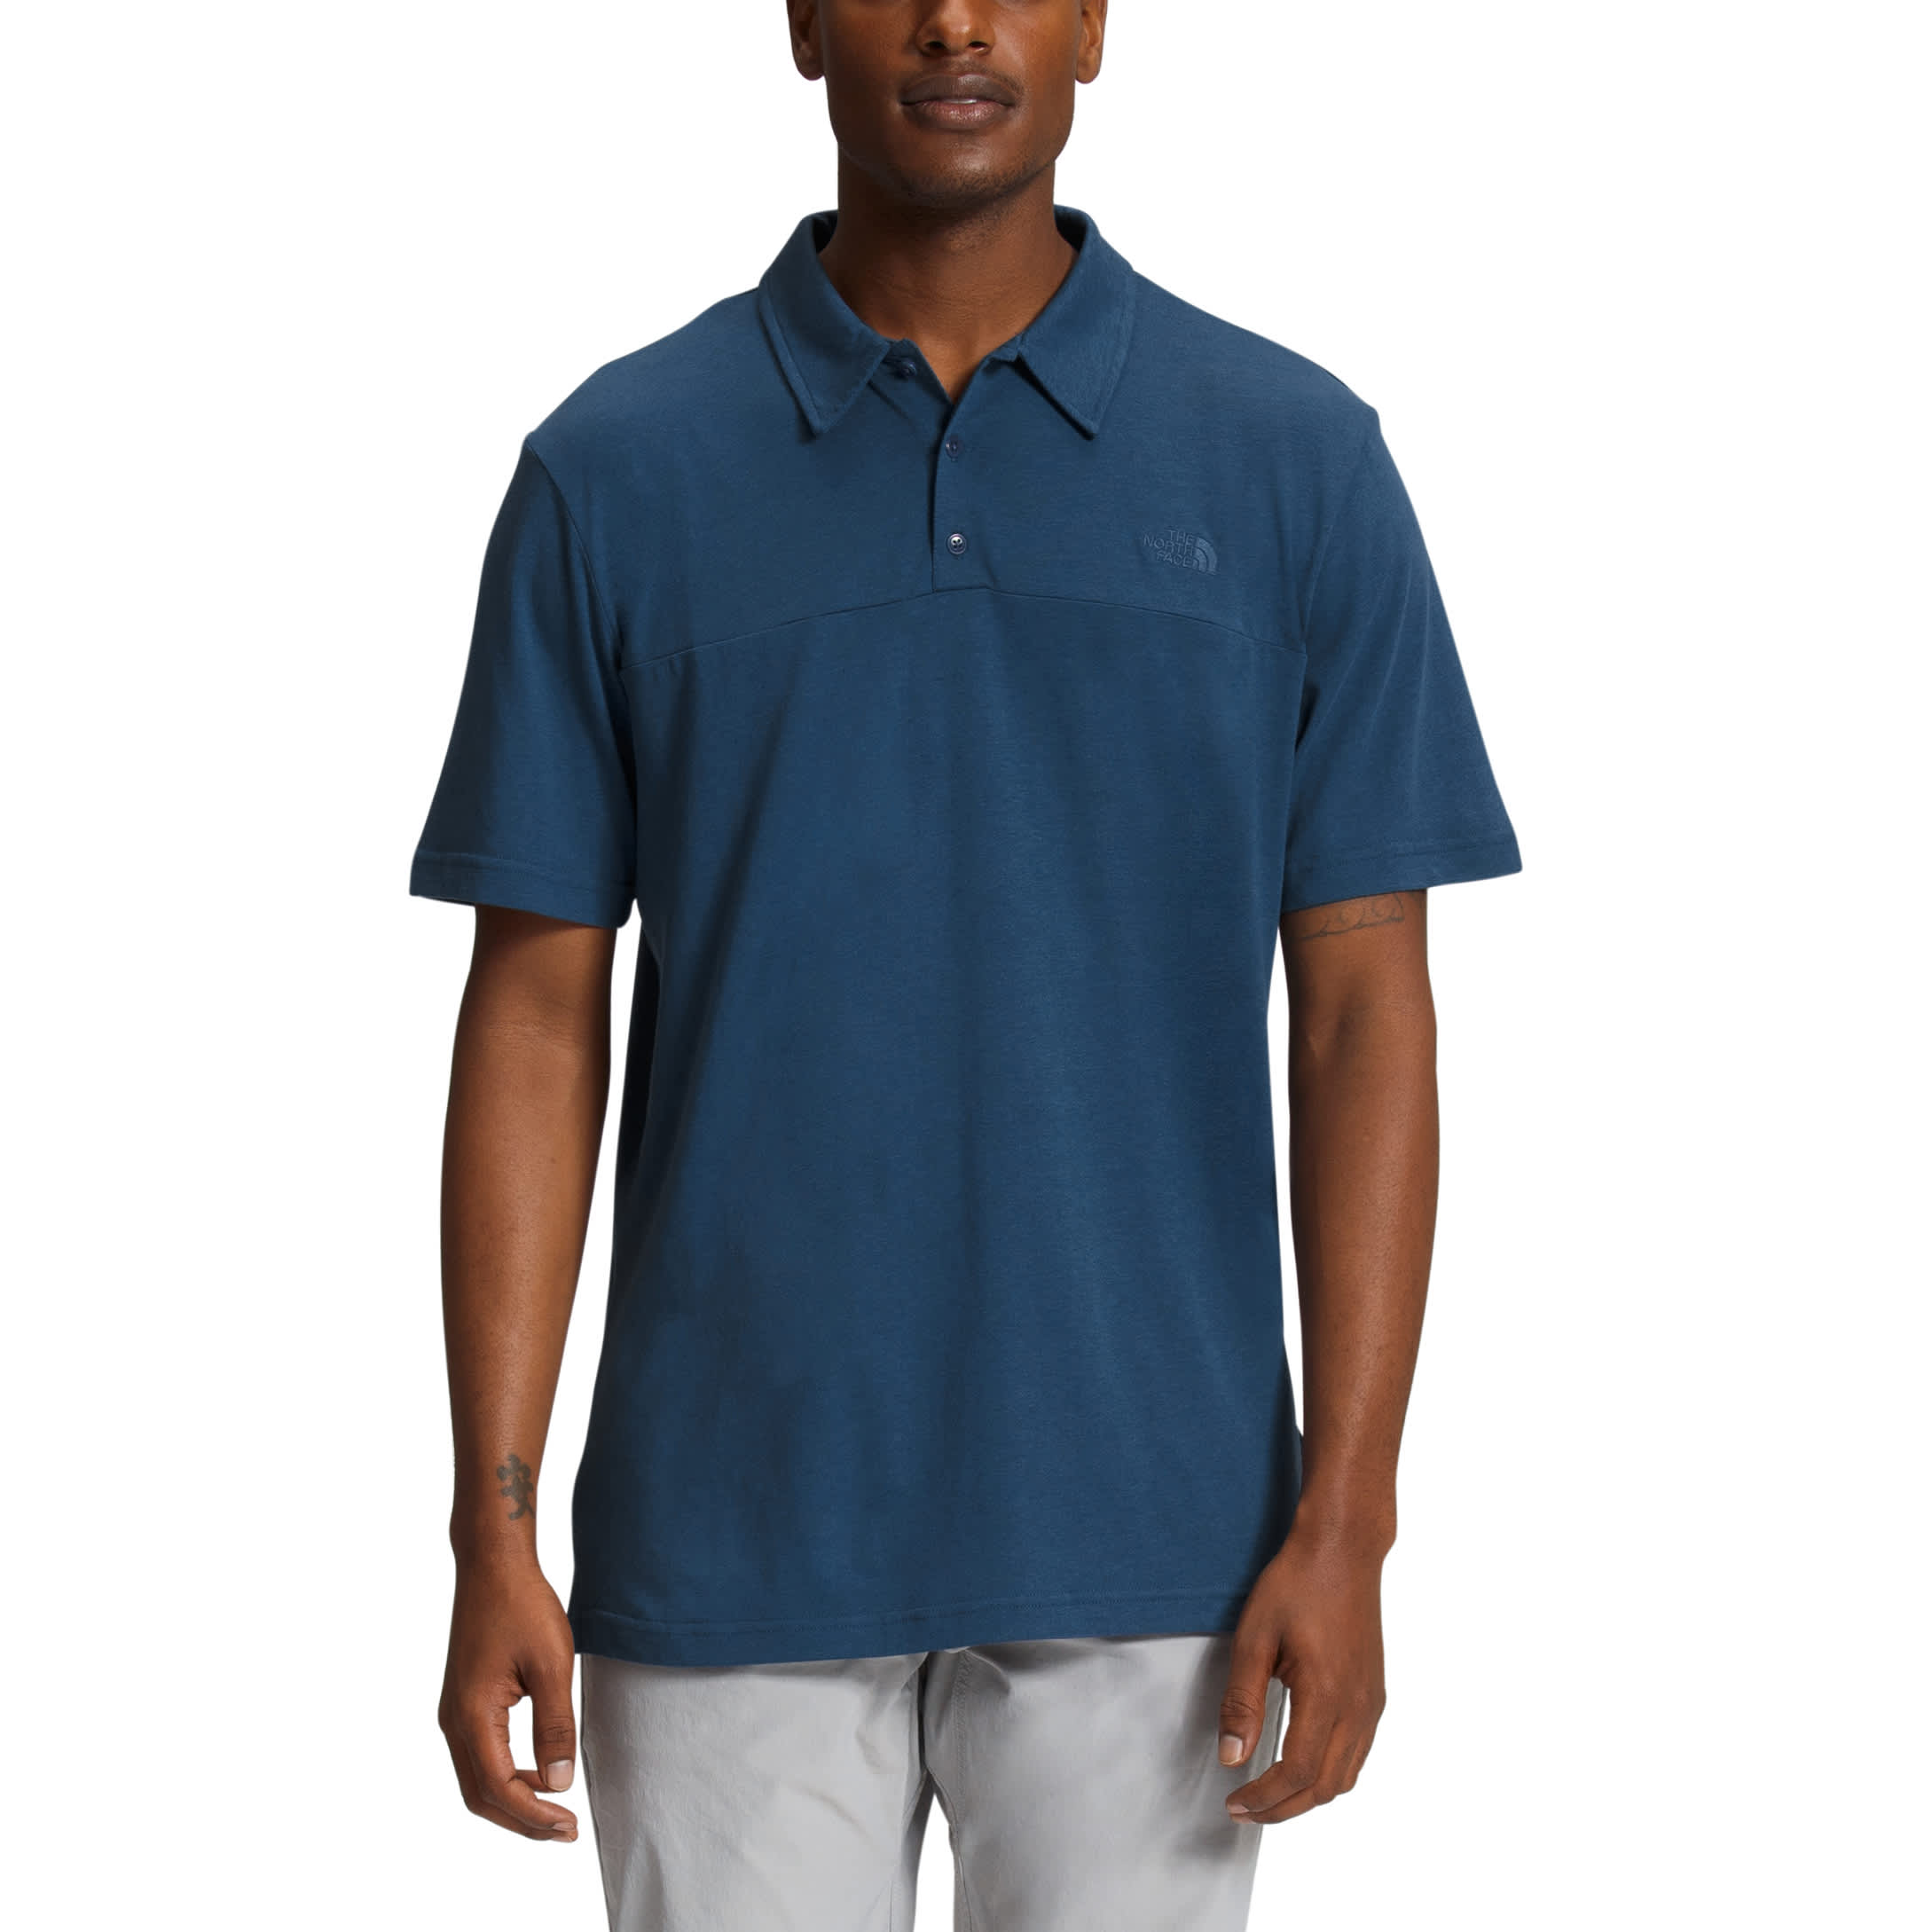 Under Armour Tactical Performance Short-Sleeve Polo Shirt for Men